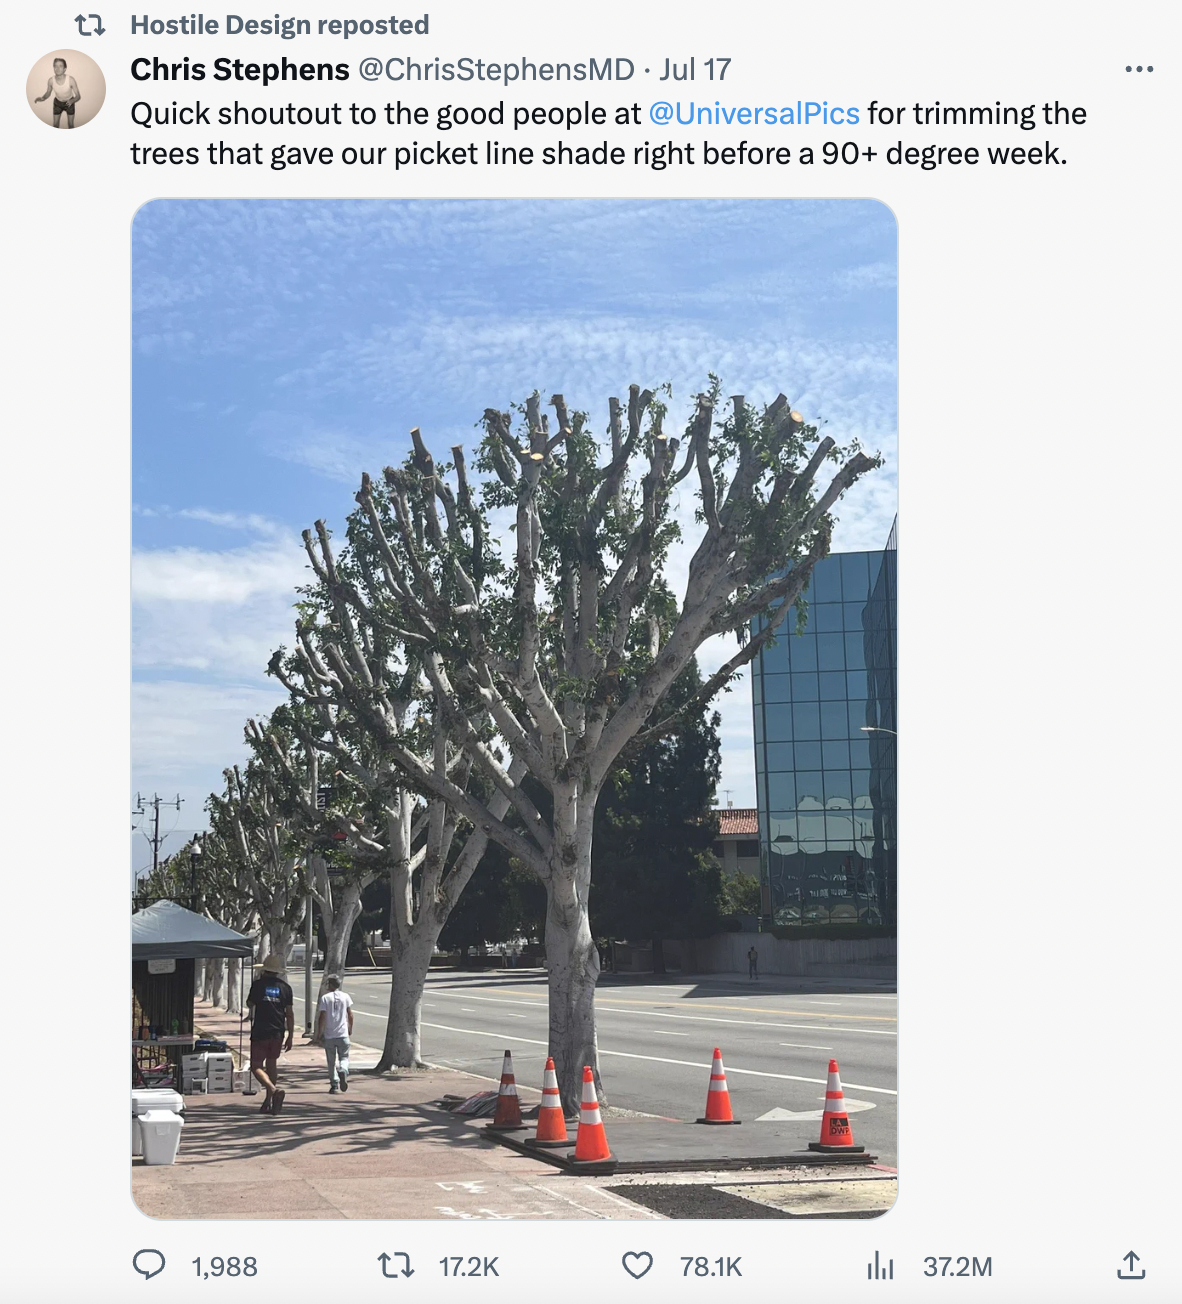 hostile design - universal studios tree trim - t Hostile Design reposted Chris Stephens Jul 17 Quick shoutout to the good people at Pics for trimming the trees that gave our picket line shade right before a 90 degree week. 1,988 13 37.2M